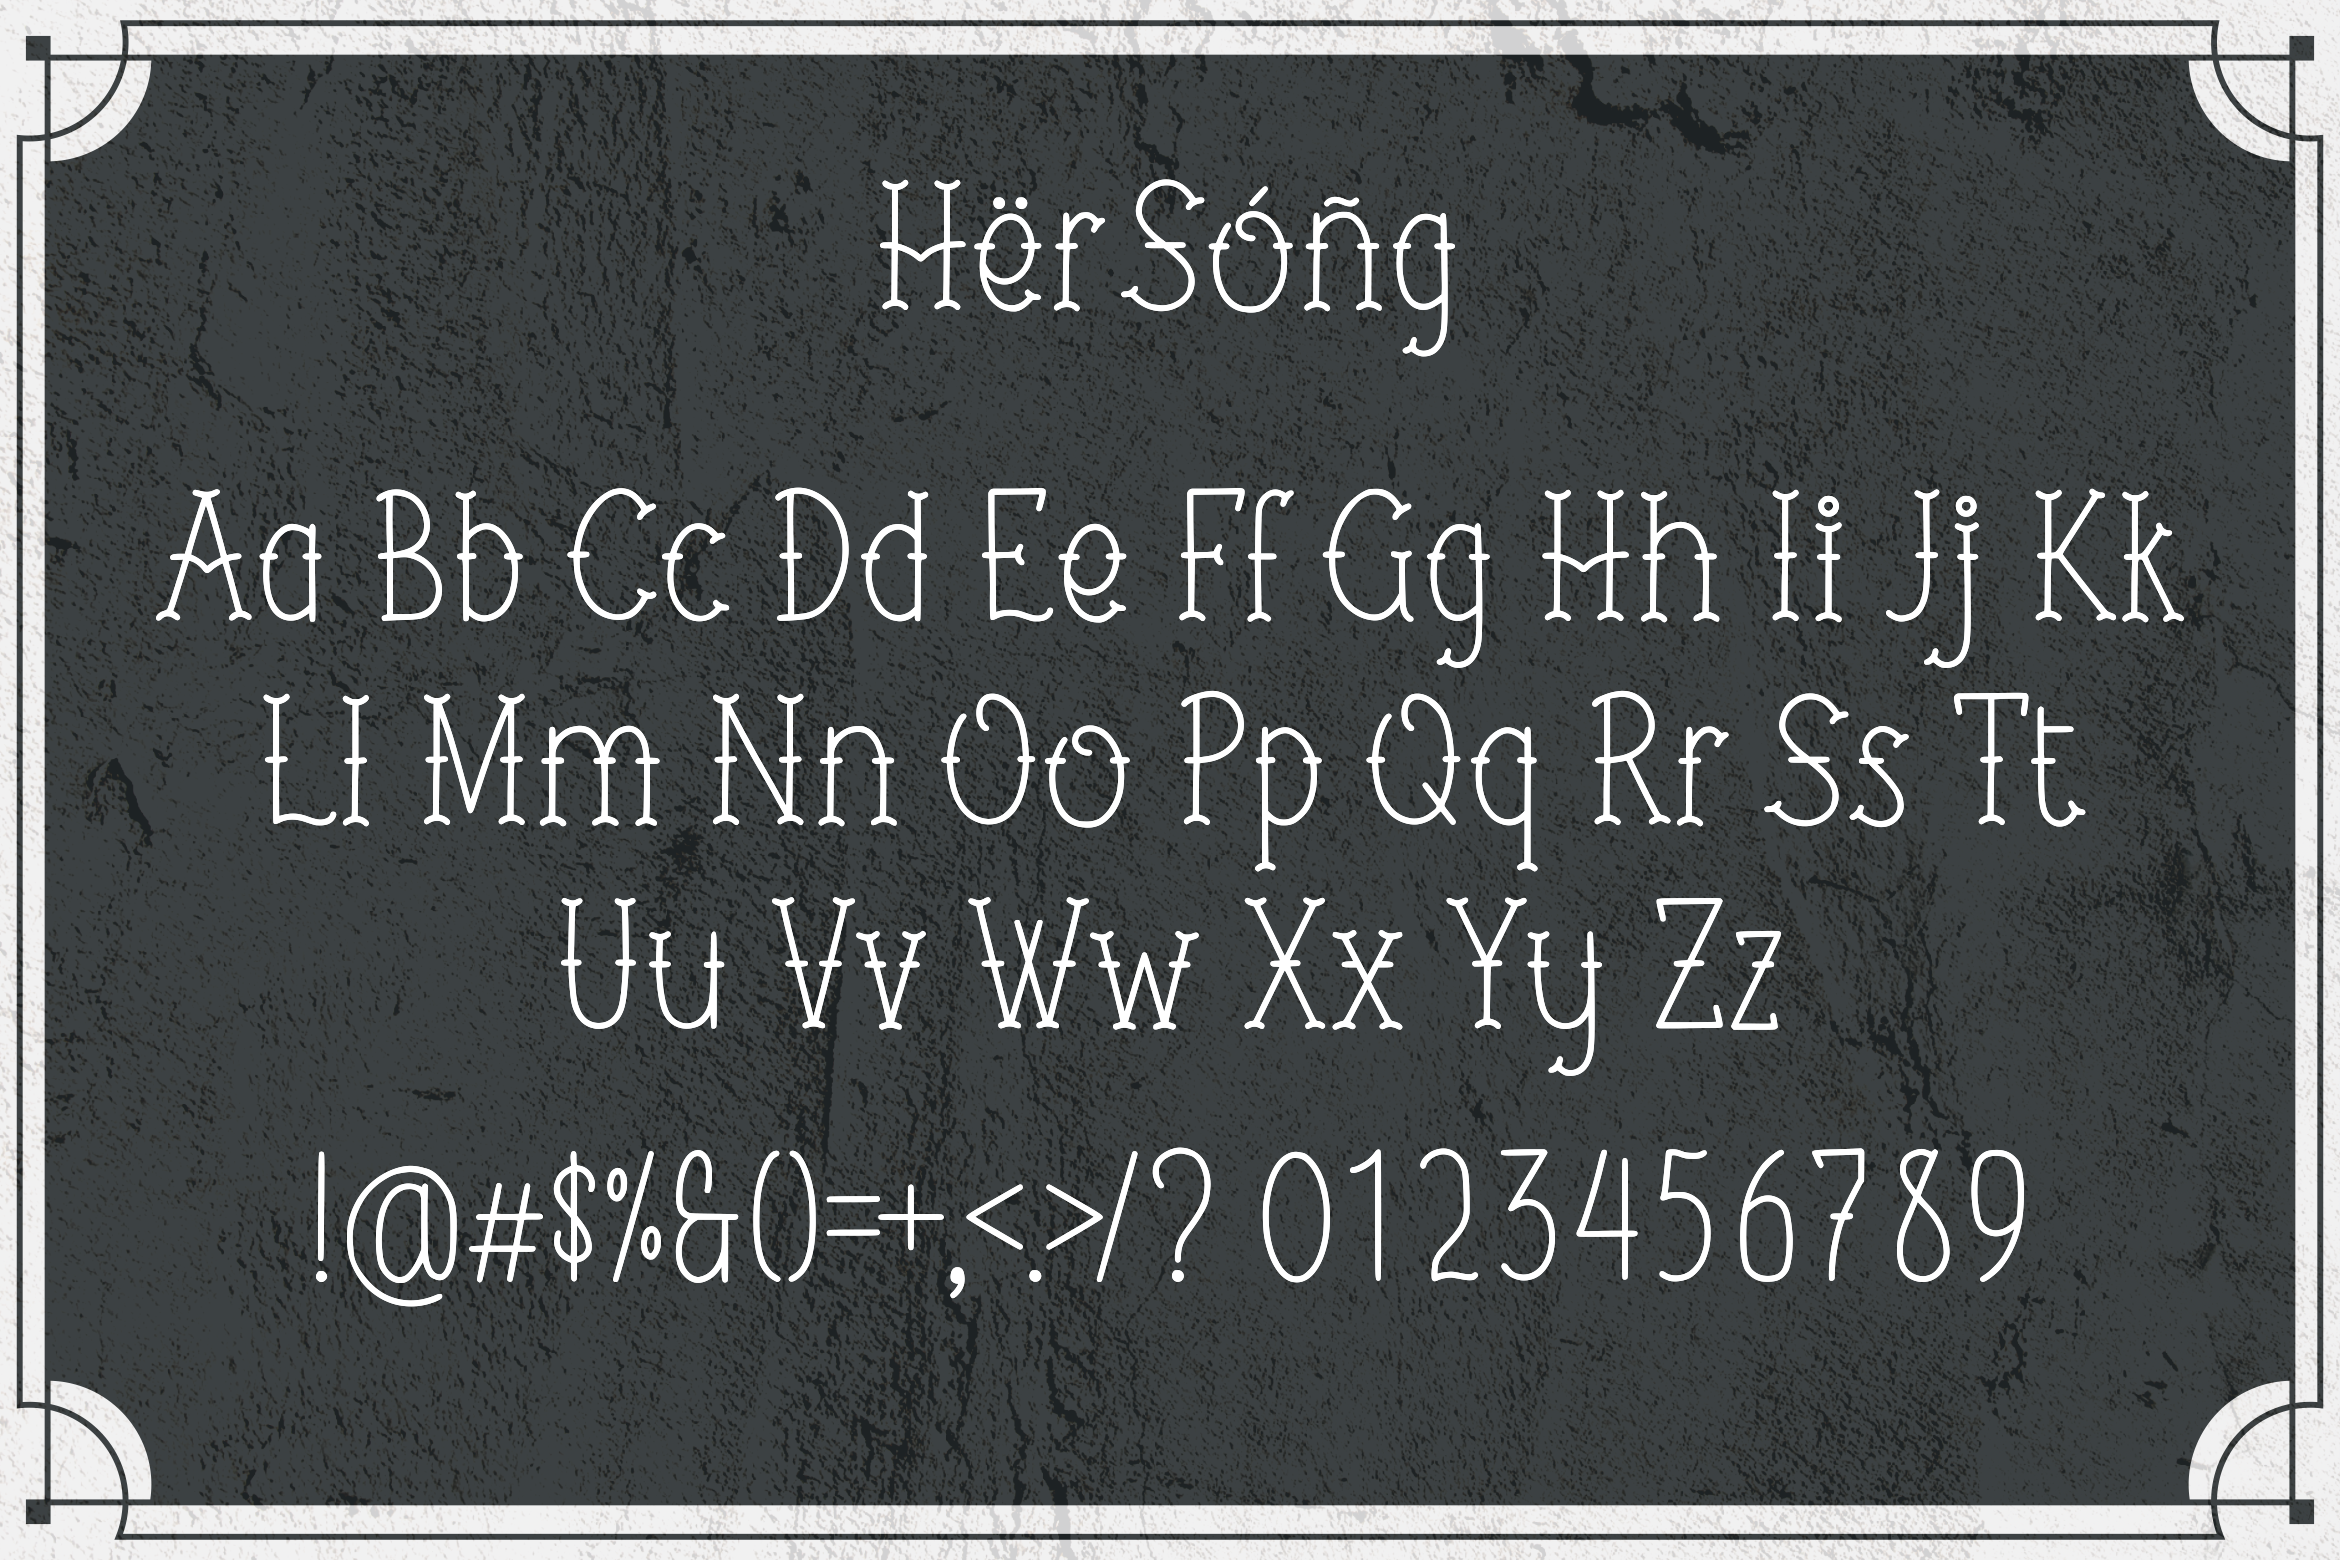 Her Song Demo